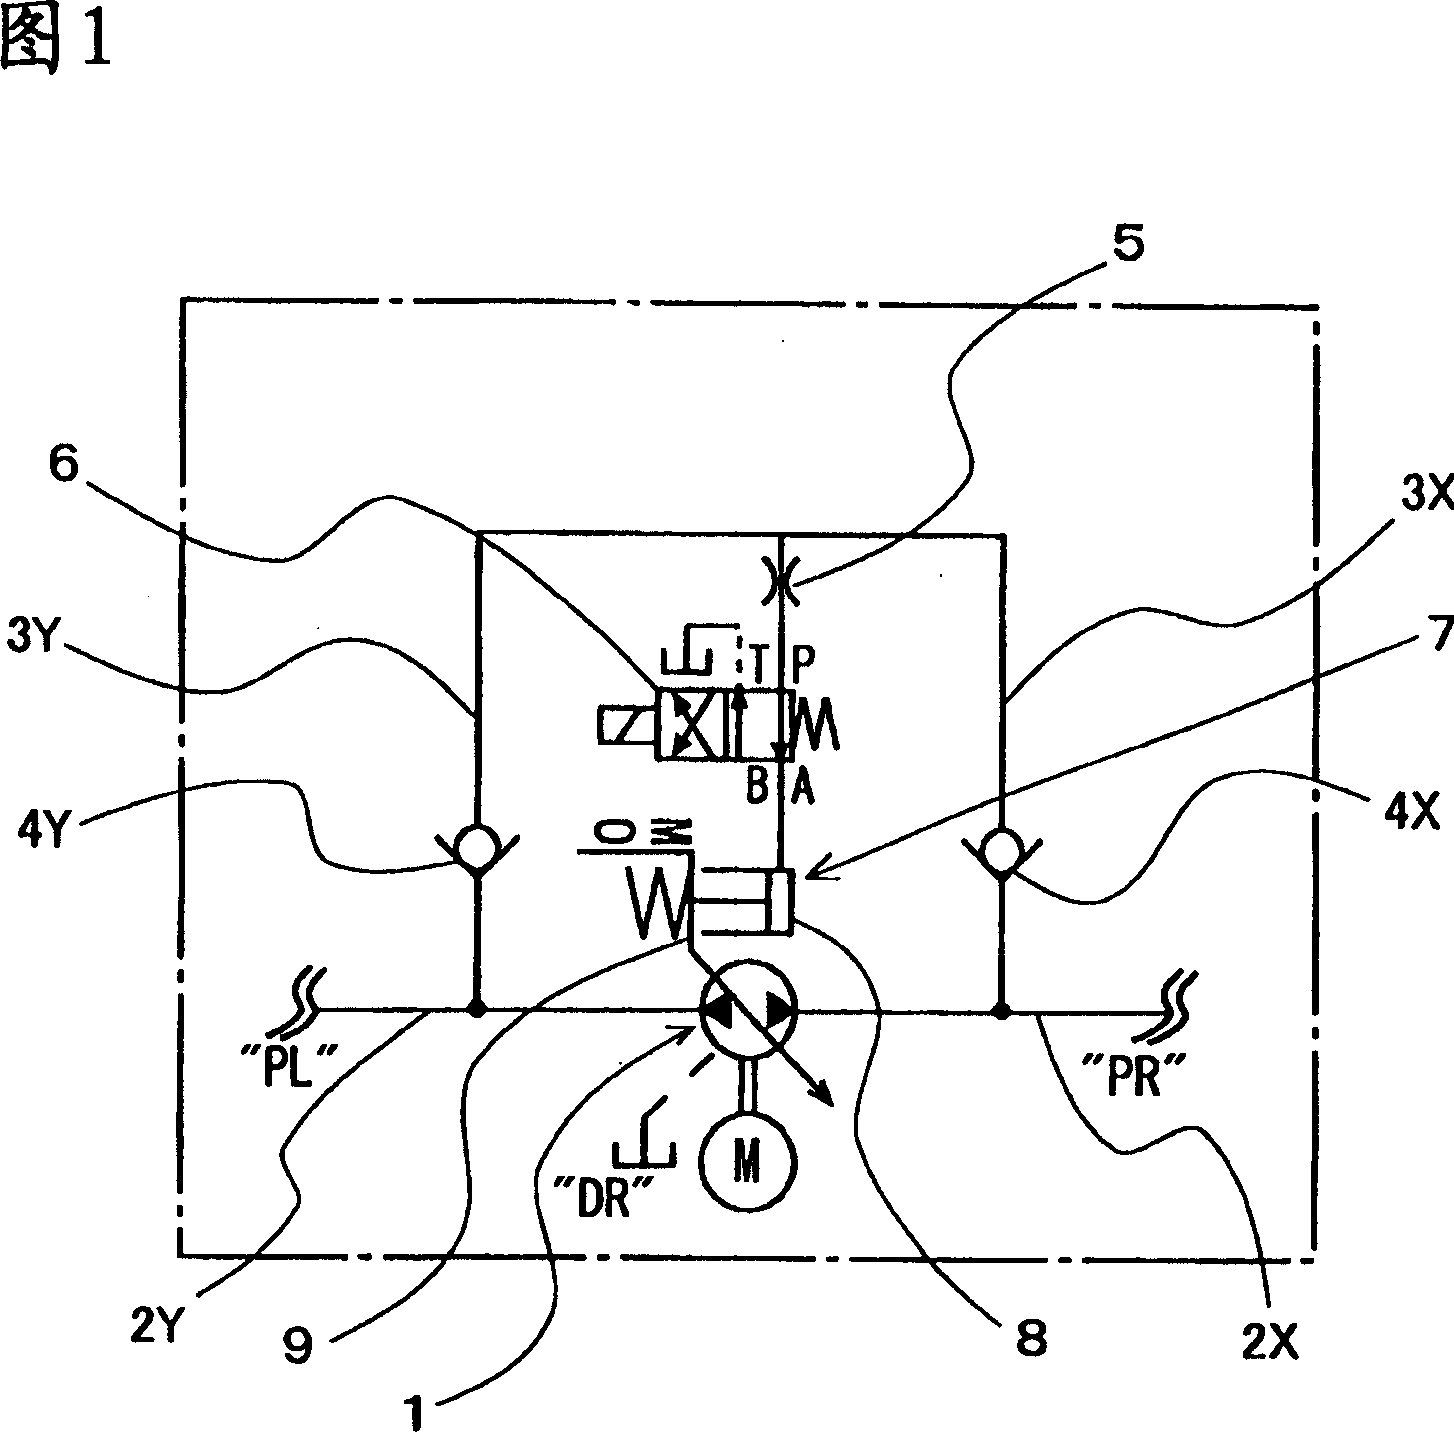 Volume-variable bi-directional rotary pump and hydraulic loop using the pump